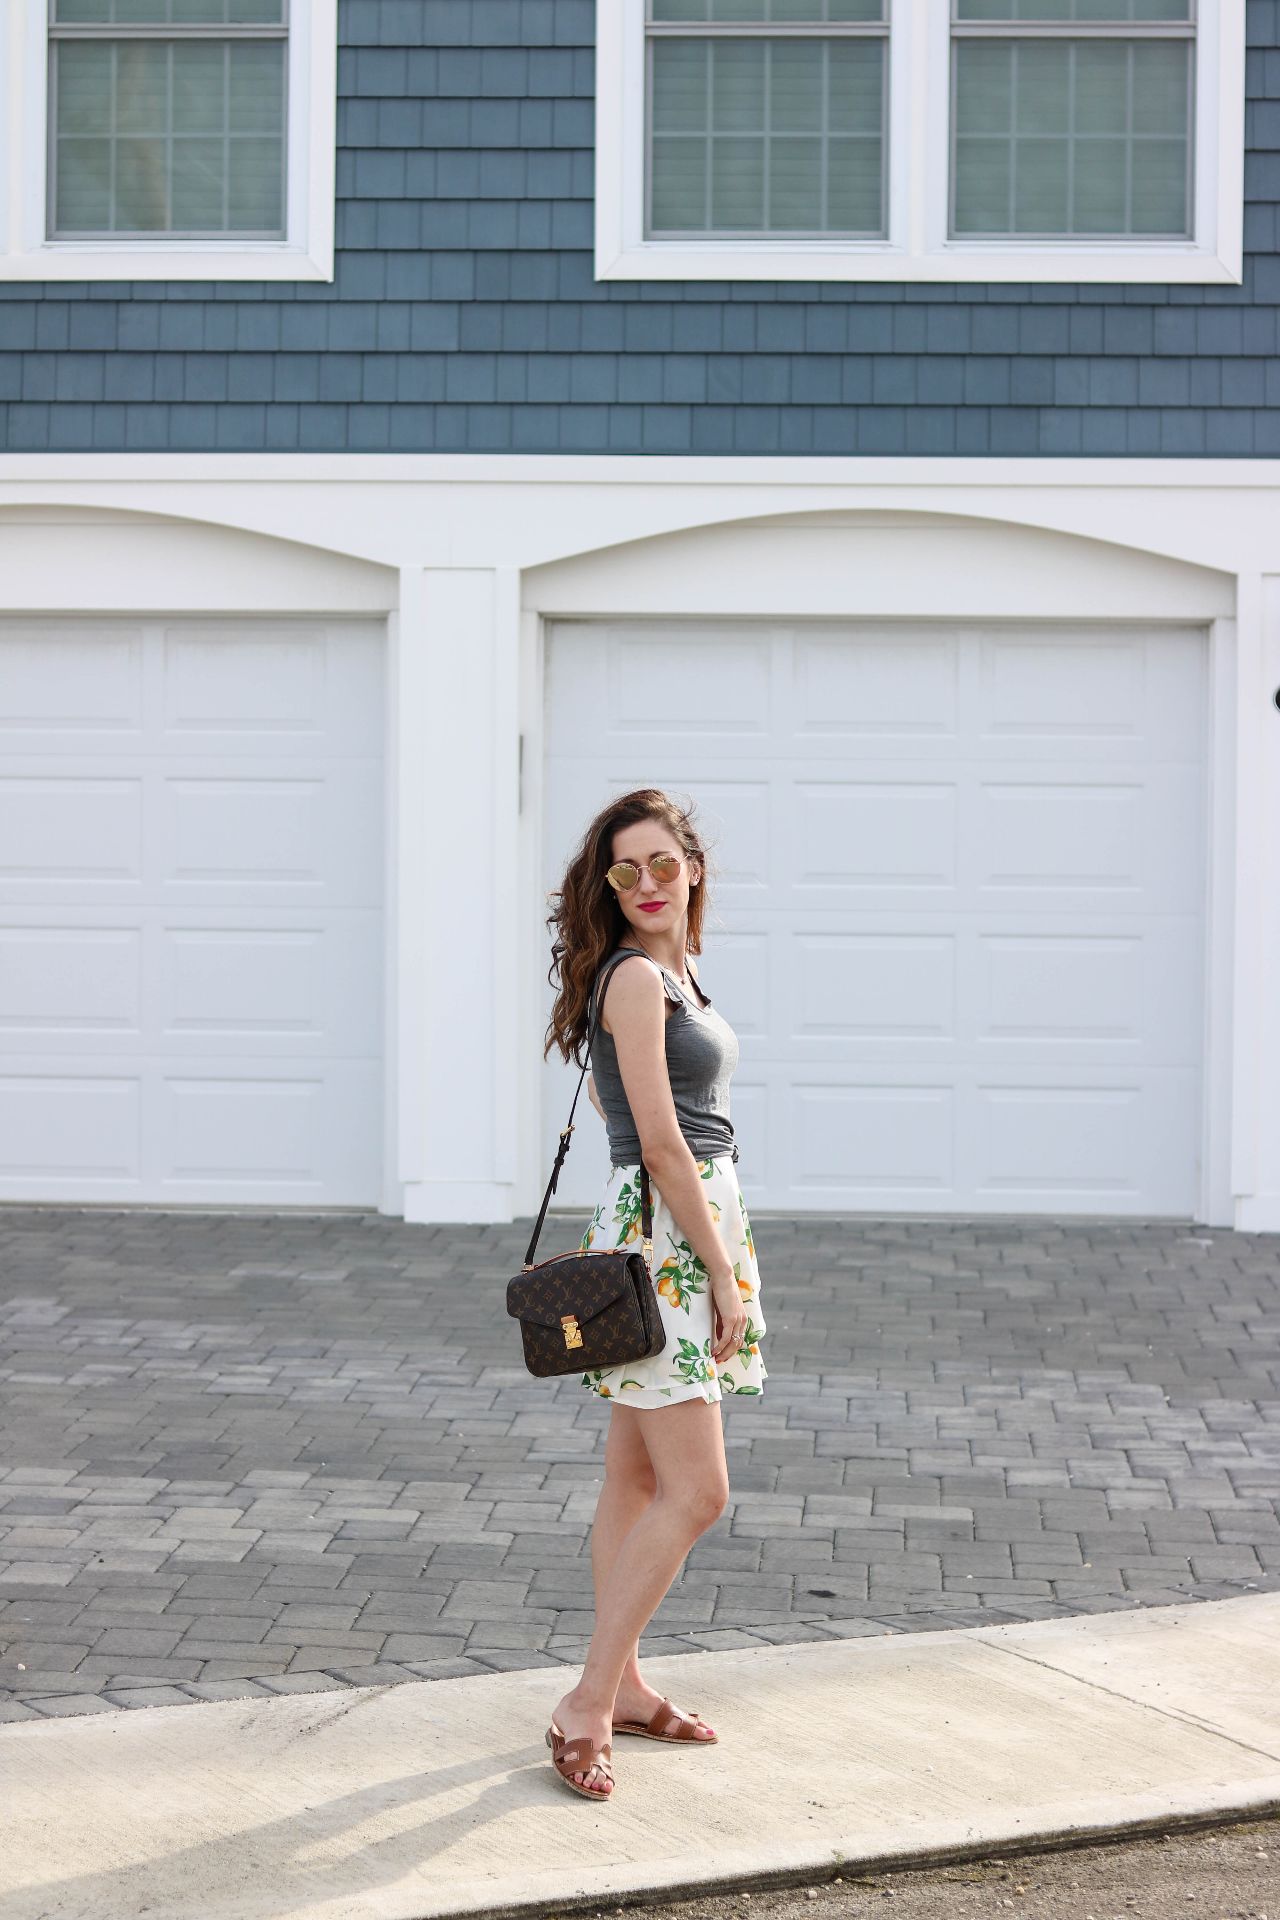 Feelin' fruity in this $20 lemon skirt, as seen on Philadelphia style blogger, Erica of Coming Up Roses. See how she styled it and shop the lemon skirt while shopping other fruit-themed pieces for summer!